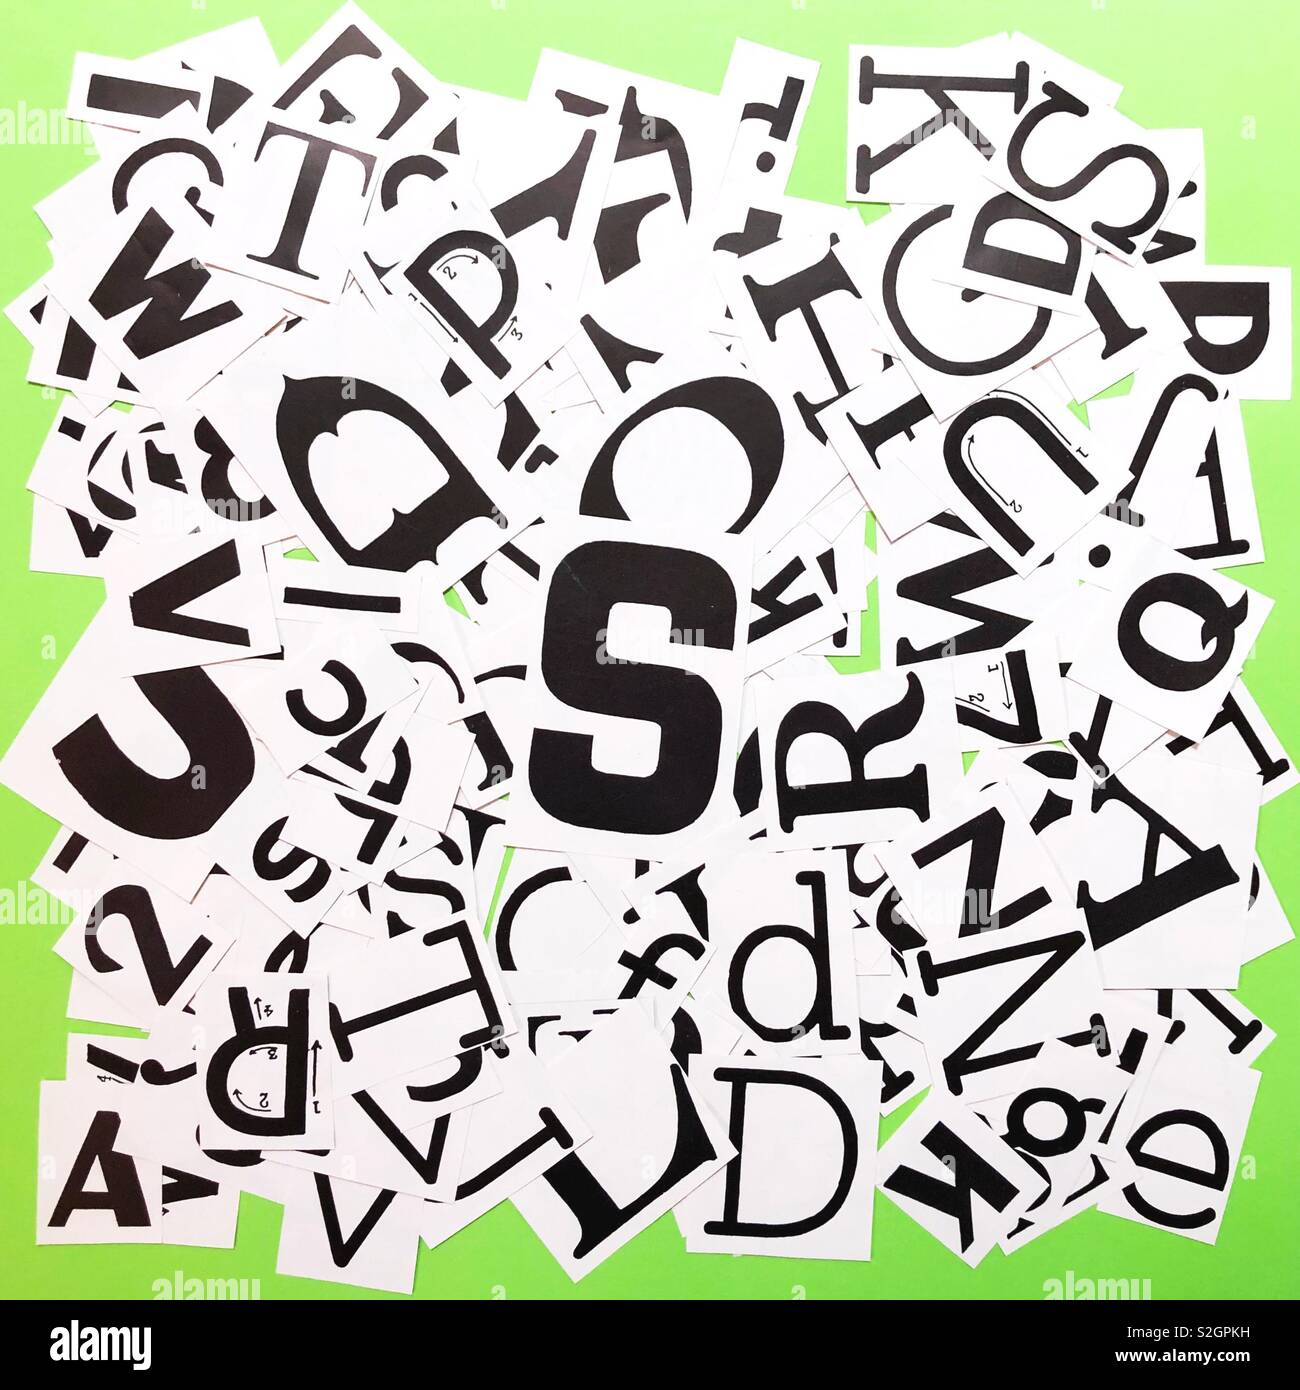 A pile of cut out letters in different fonts and sizes. Stock Photo